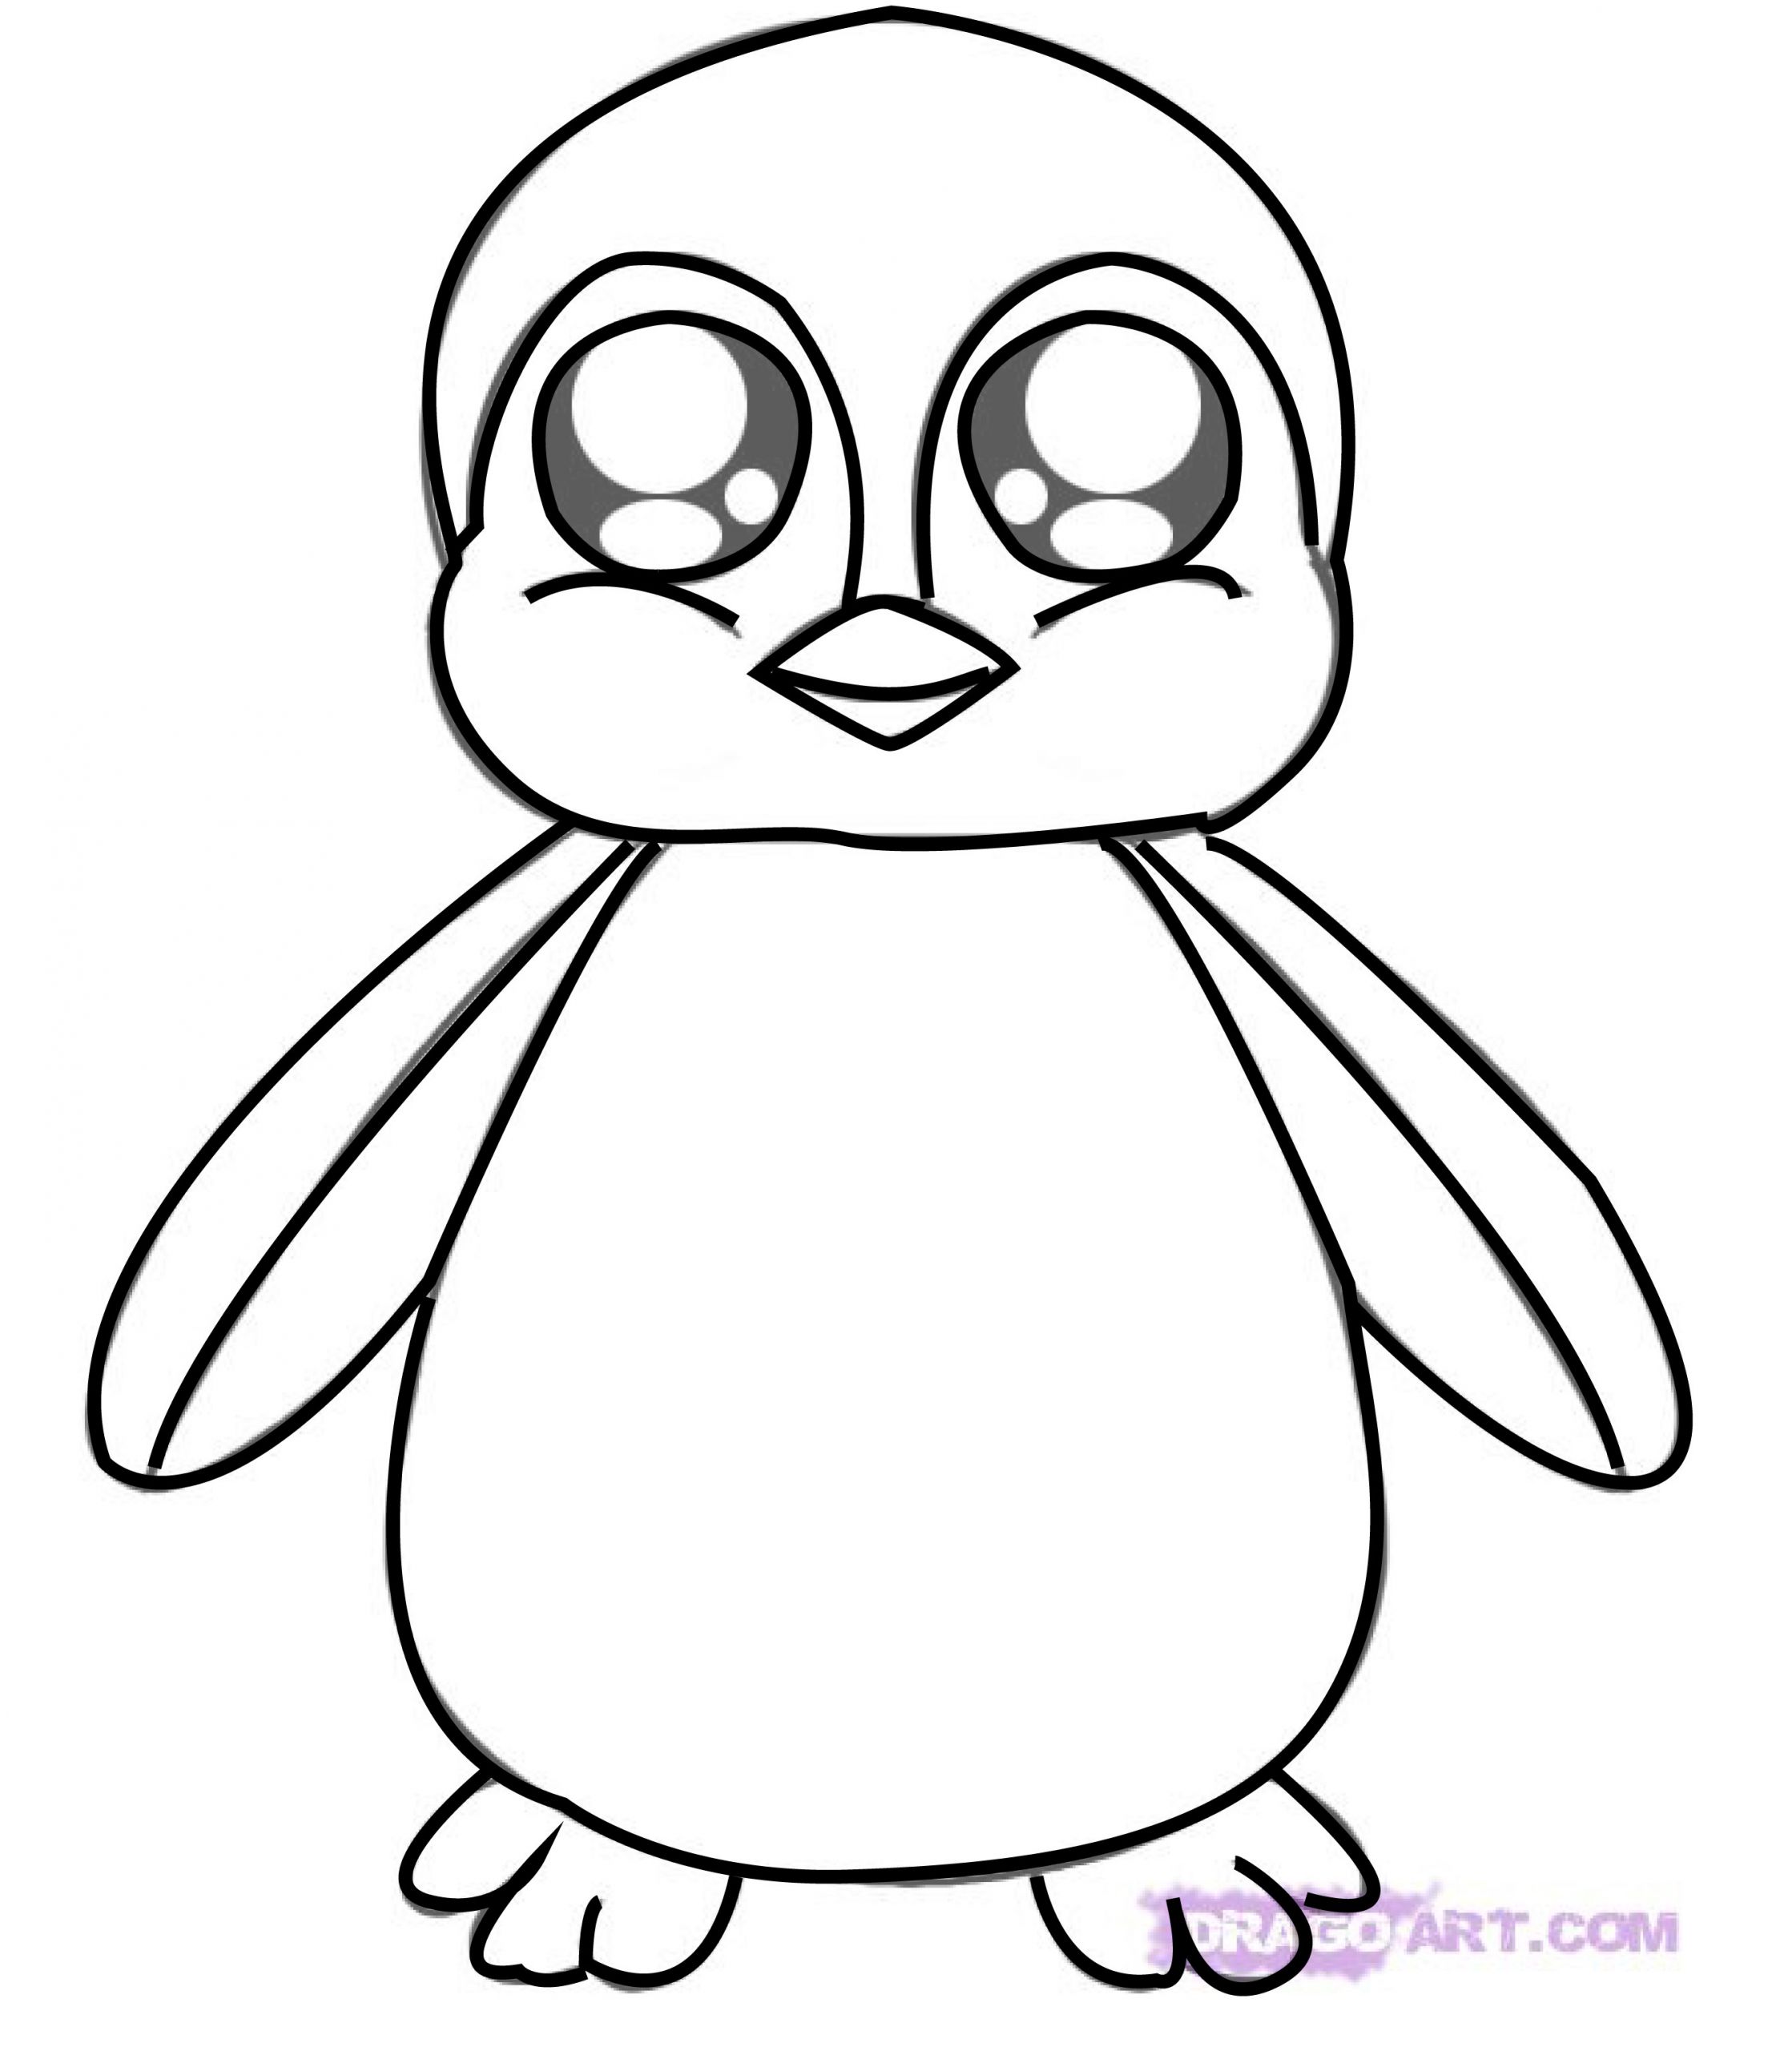 Baby Penguin Coloring Page
 Cute Stitch Coloring Pages Easy